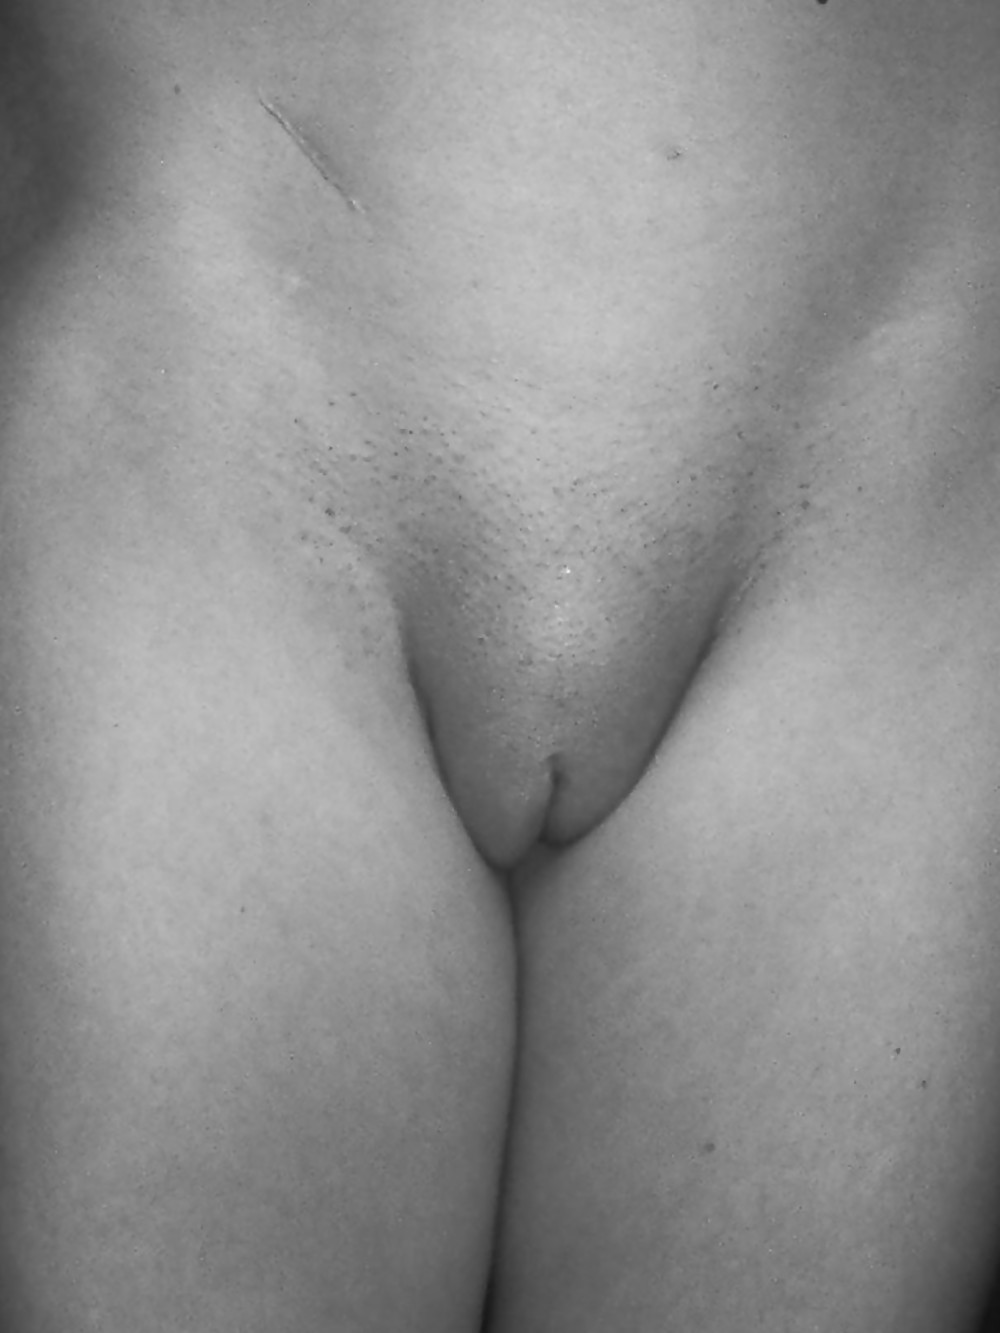 Black and white pussy closeups #4875141